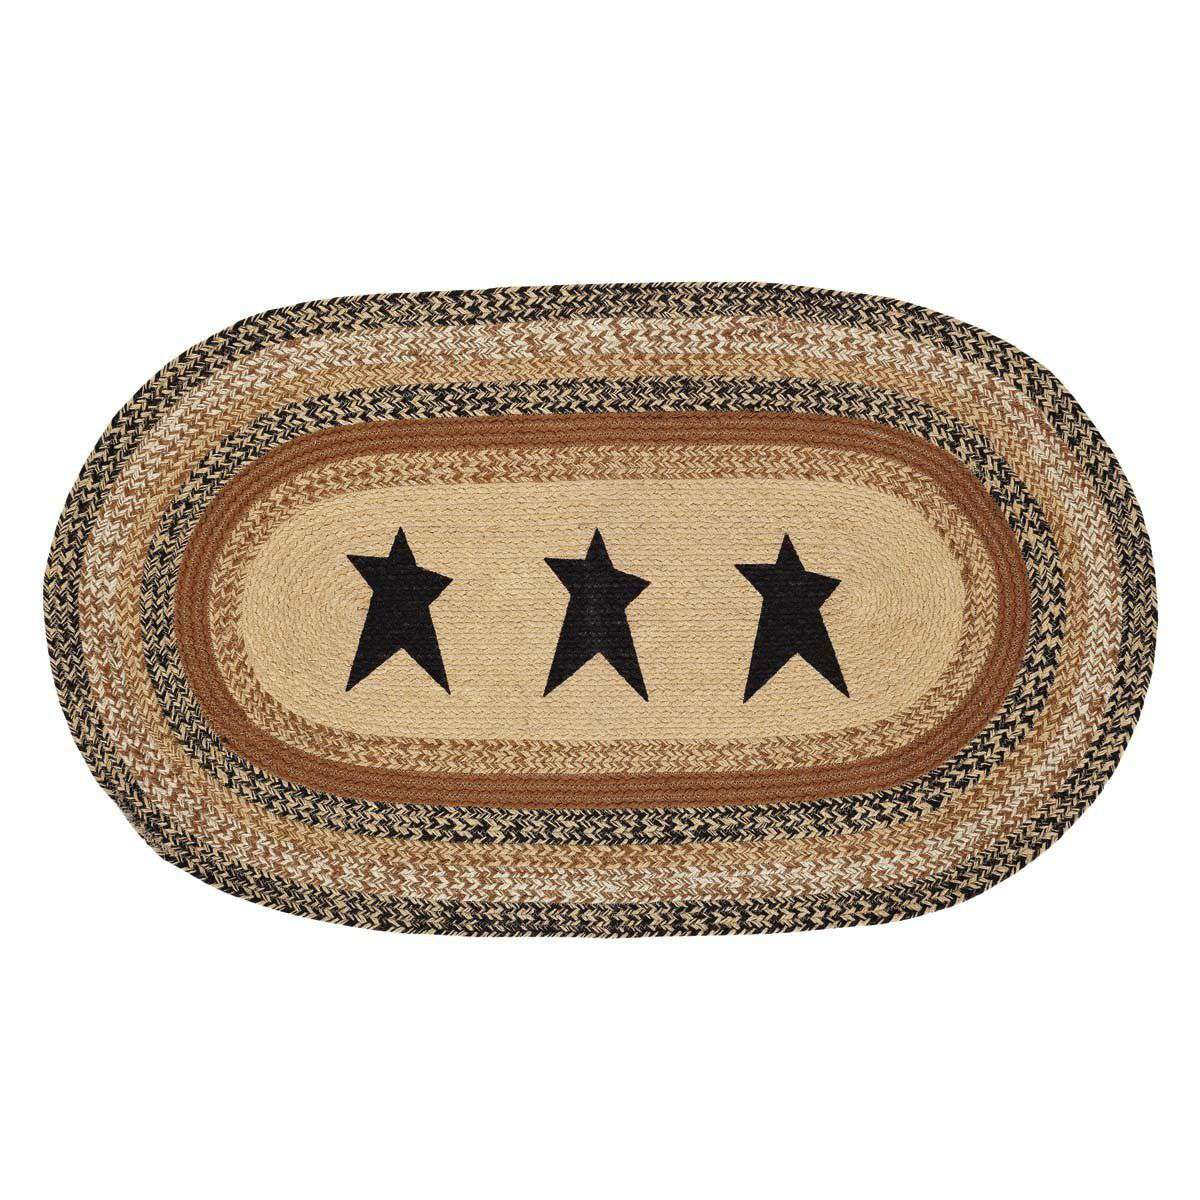 Kettle Grove Jute Braided Rugs Oval Stencil Star VHC Brands Rugs VHC Brands 36" x 60" 